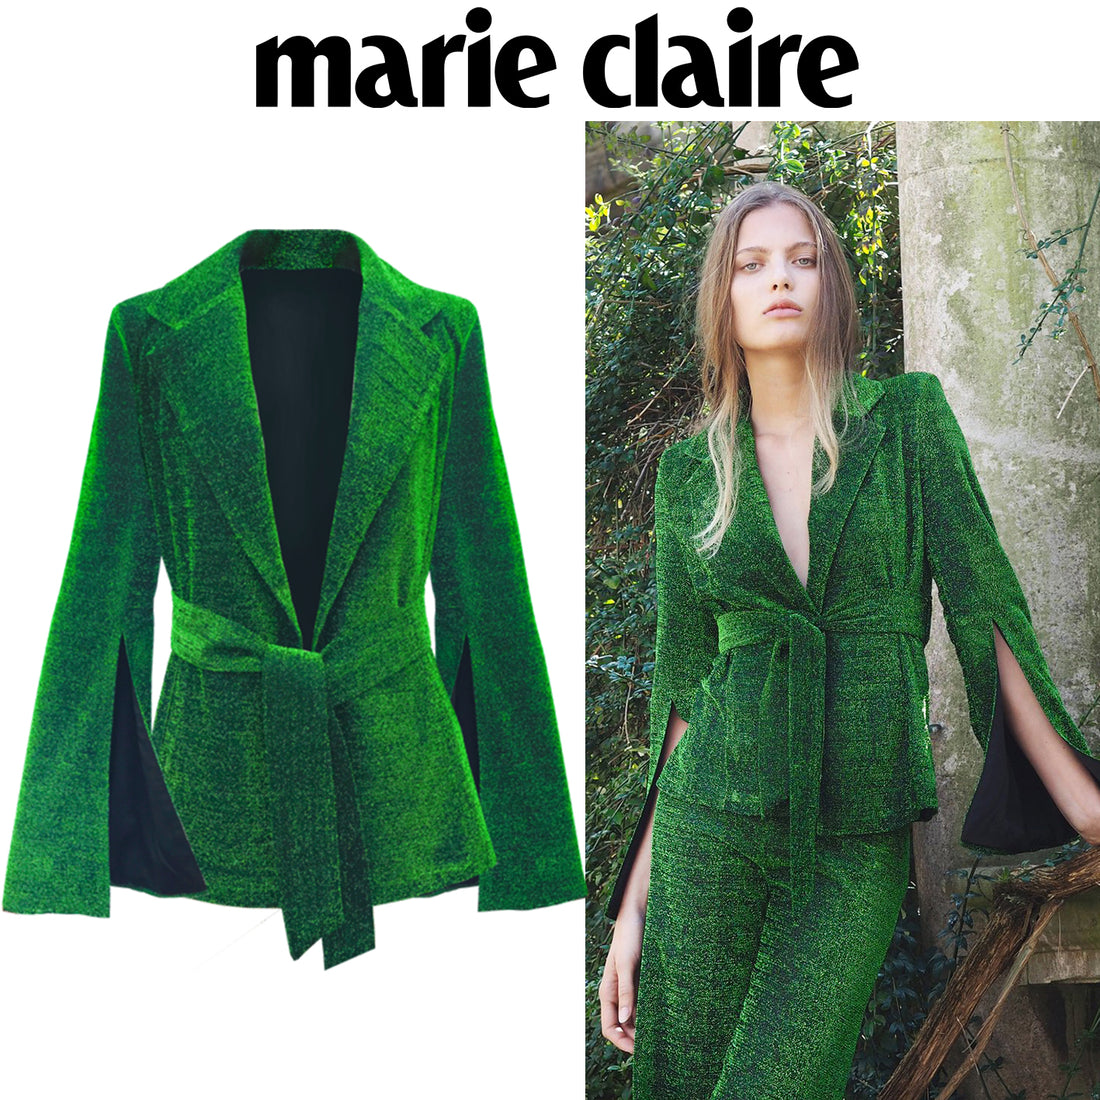 SS18 Palm Blazer featured on Marie Claire's Hot List